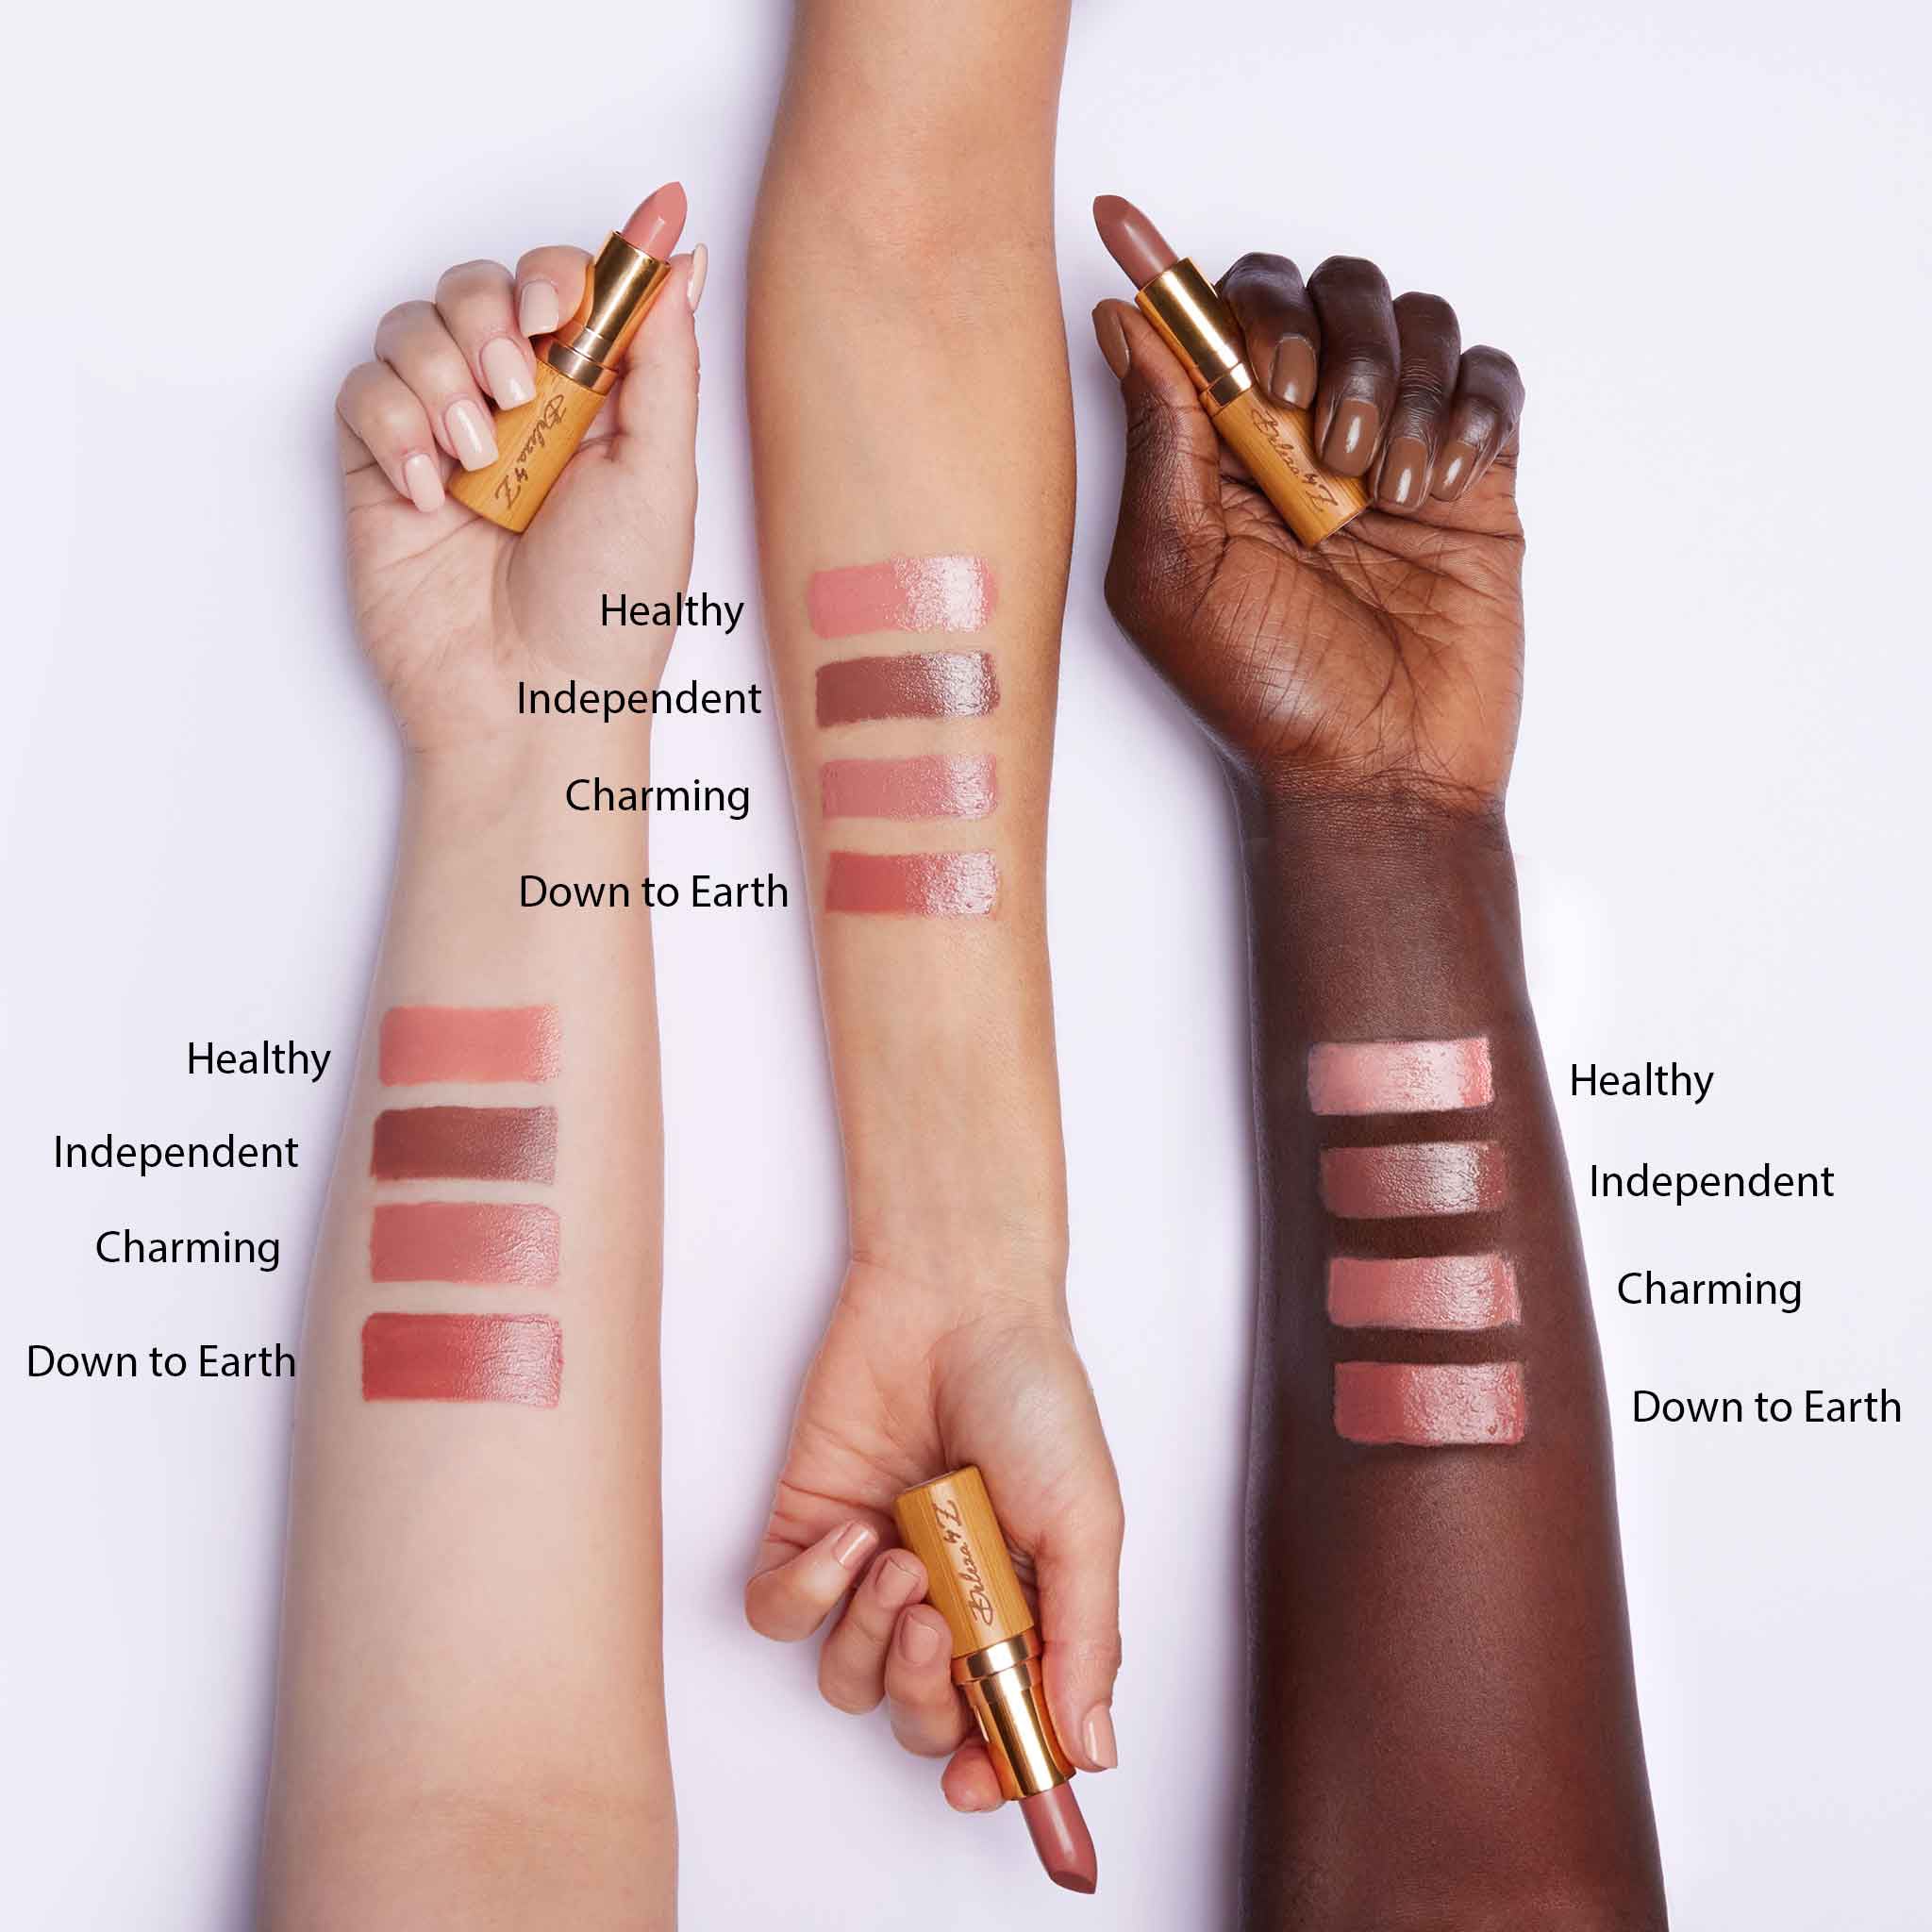 Lipstick in four beautiful "nude" shades for the perfect natural look